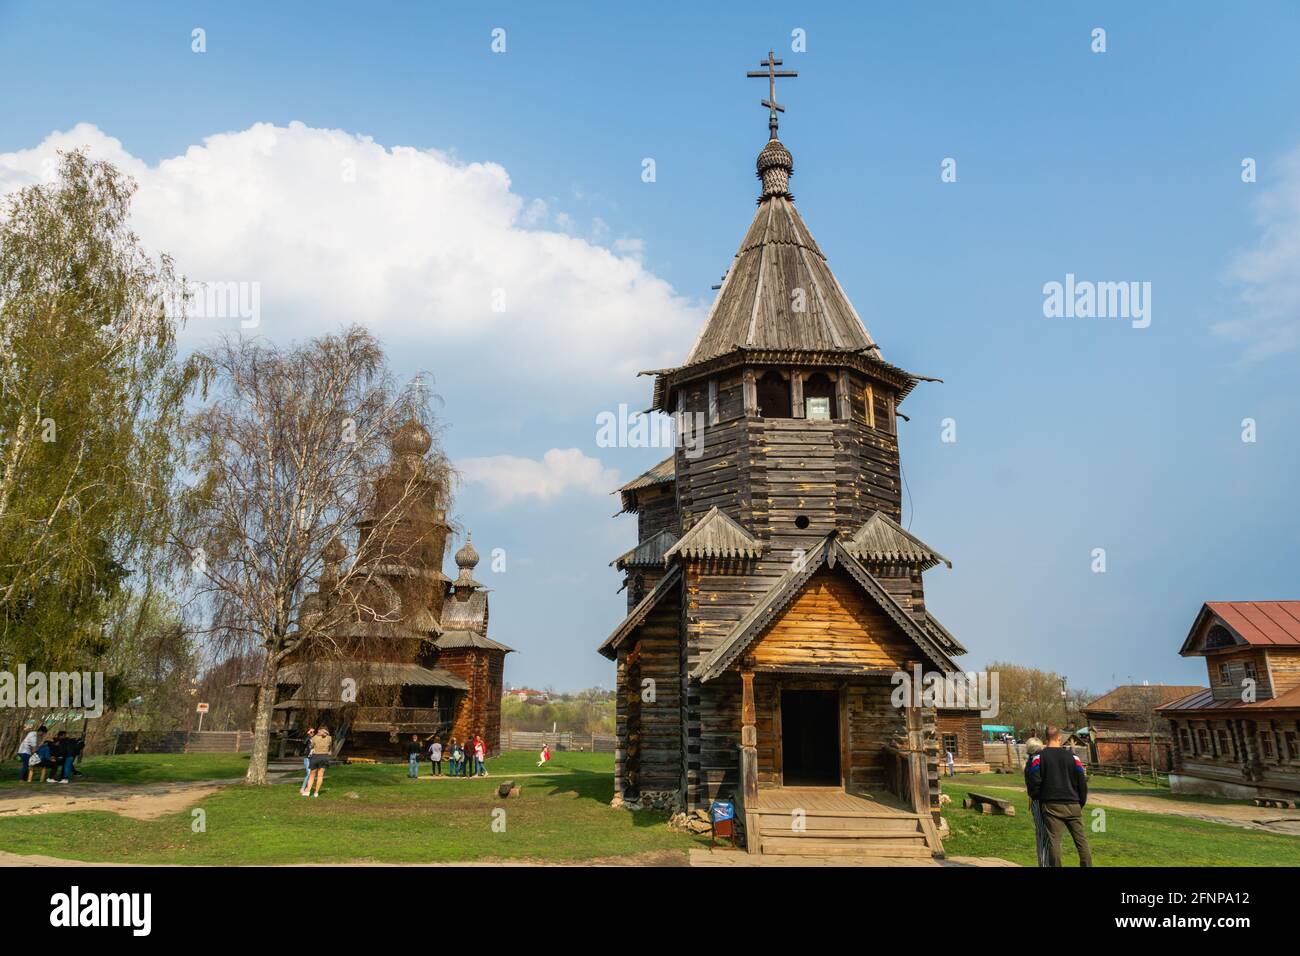 Suzdal, Russia - May 2019: Wooden traditional buildings in the museum of wooden architecture in Suzdal, Russia. Suzdal is a Golden Ring town Stock Photo